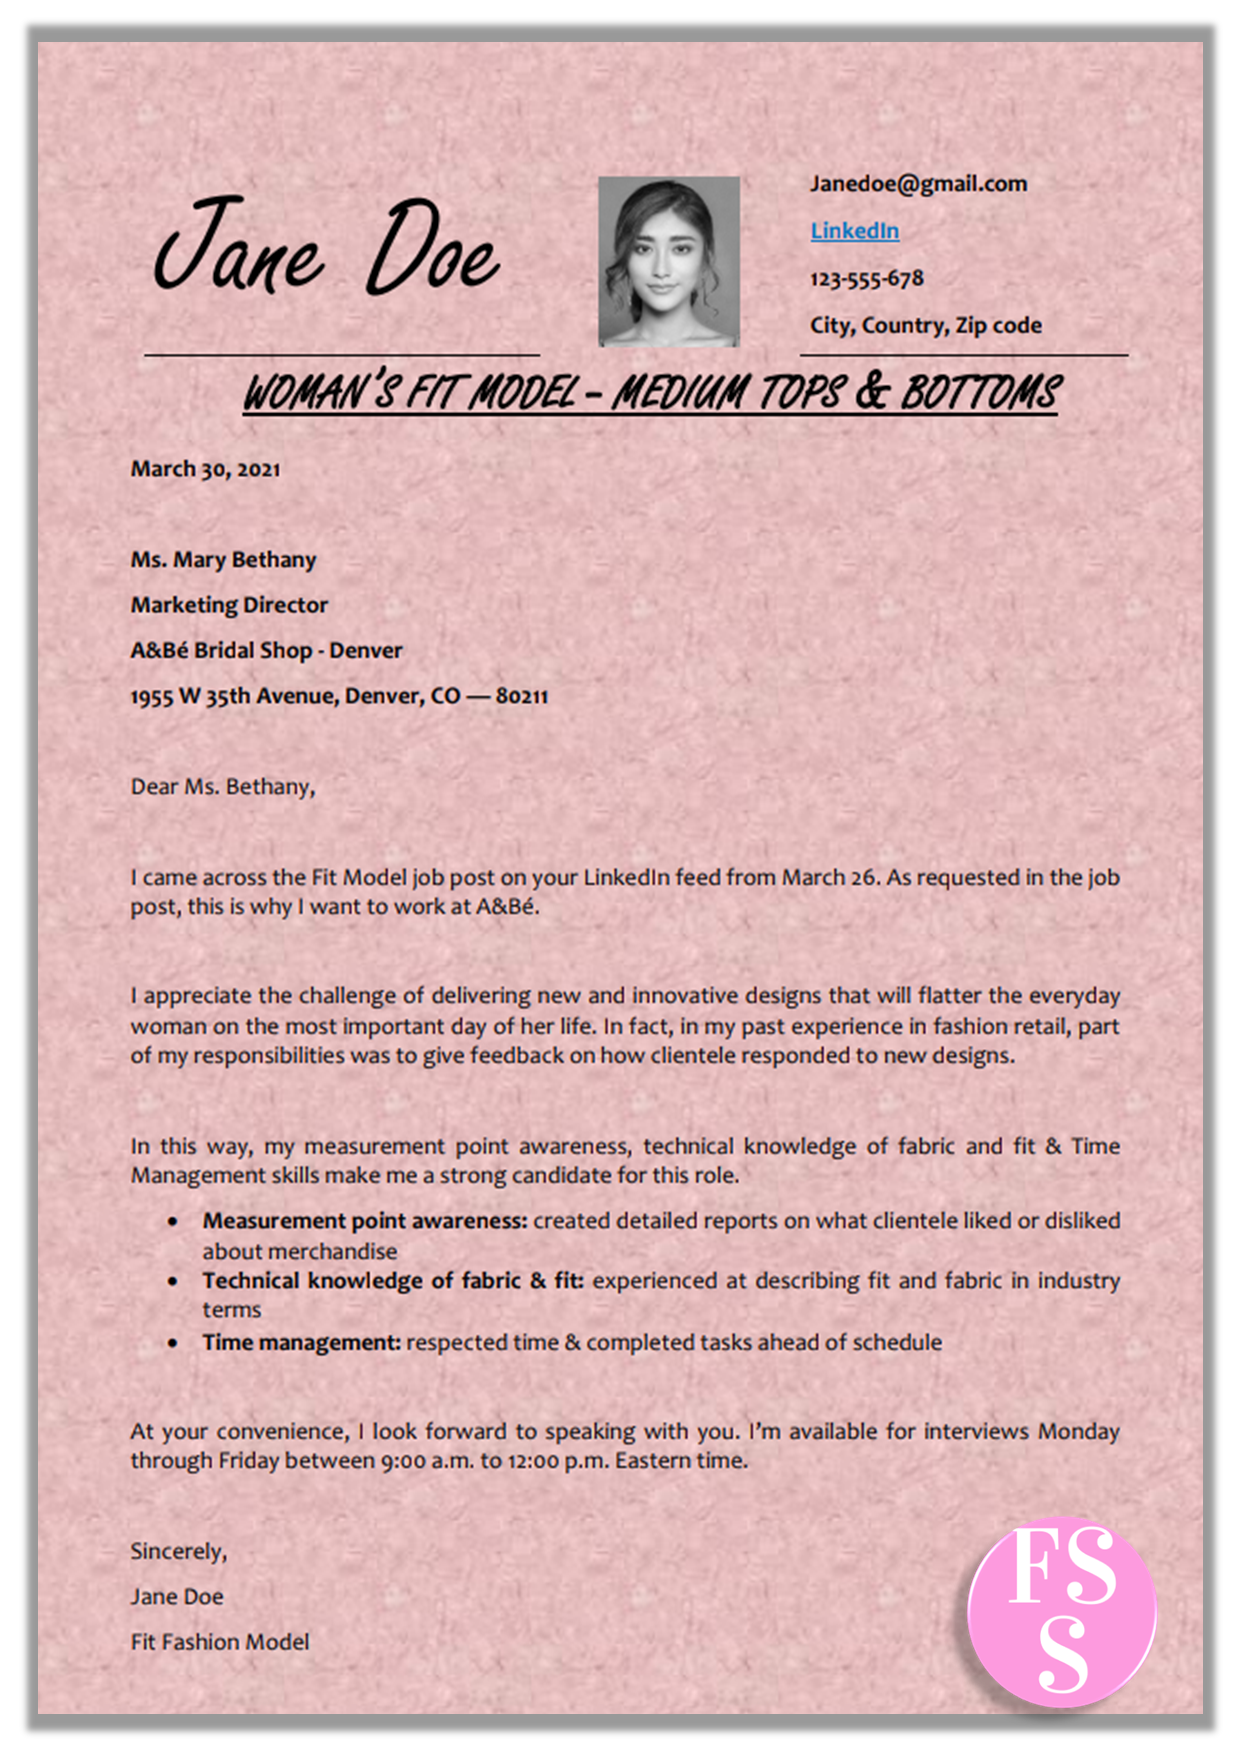 Single page Fashion Model Cover Letter. On pink tissue paper background. In 12-point font.